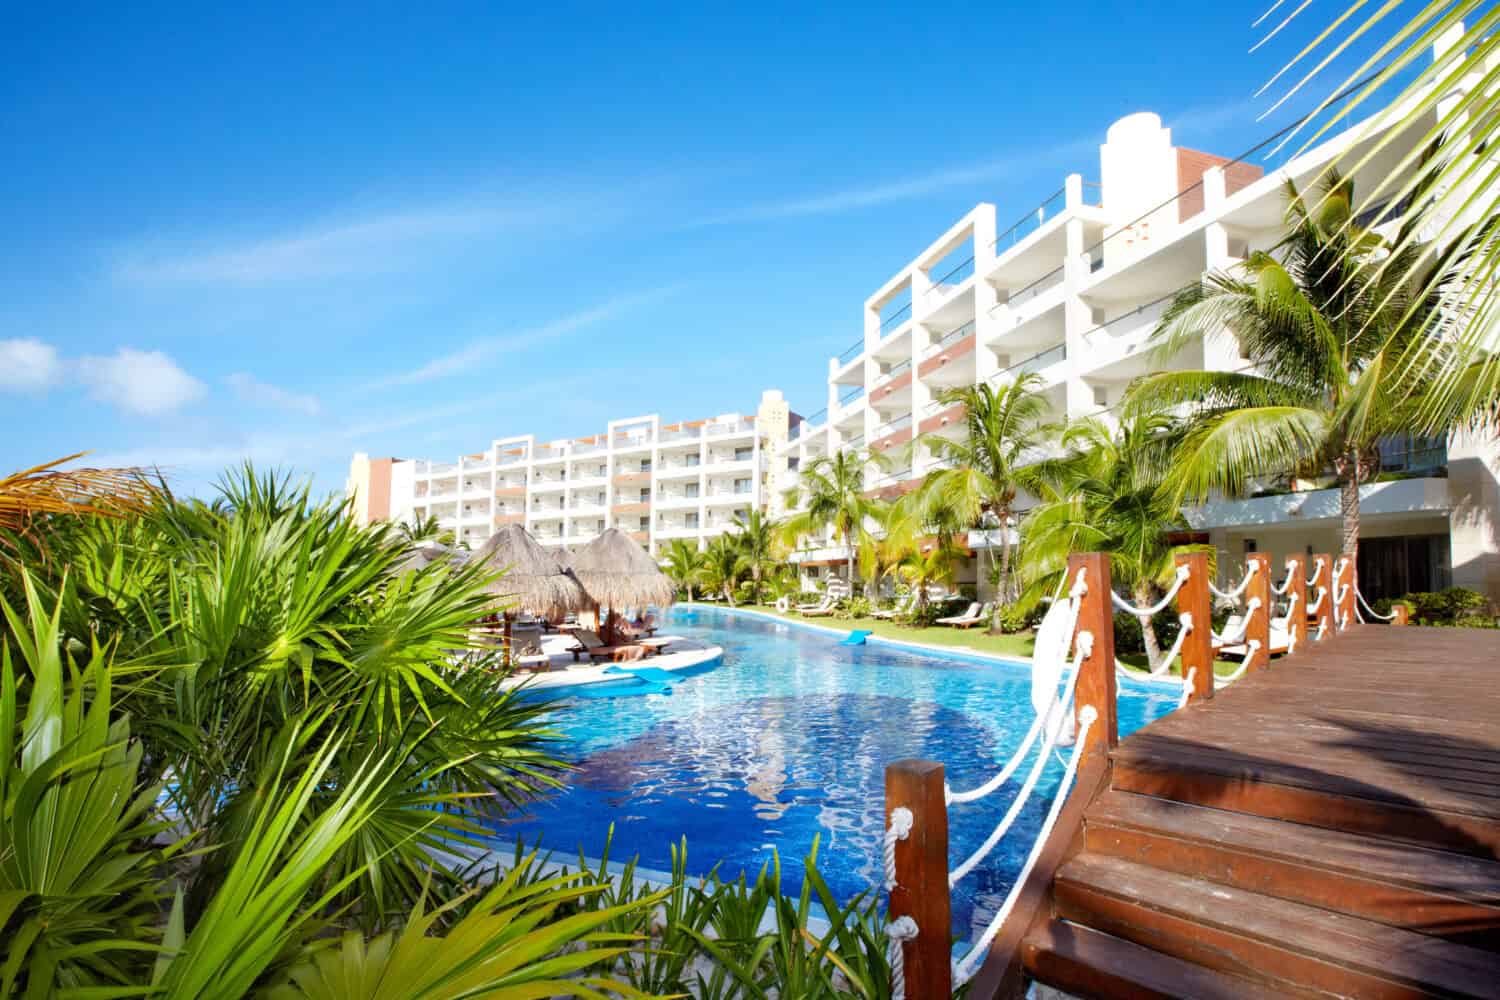 <ul> <li><strong>Sample Cost: </strong>$1,420 – $3,340 (Hotel NYX Cancun)</li> </ul> <p>There is no question that Cancun has any number of hotels competing for budget dollars. Choosing one is difficult, but according to TripAdvisor, Hotel NYX Cancun is the number one best value. Hotel NYX has even received an <a href="https://www.oyster.com/" rel="noopener">Oyster Award</a> for the Best Value Hotel in Cancun. So, we're confident with this recommendation and its "upper-middle-range" family-friendly environment.</p> <p>For the entirety of your June stay from 6/23 to 6/30, you're looking at right around $1,420 for a Standard Room. This is a double bed with a maximum capacity of two people. However, there is a caveat as you can upgrade the price to $1,770 and go all-inclusive so all of your food is free at all four on-site restaurants. Swap your dates to 12/22 to 12/29 and you're looking at $3,075 for the same room. Bump that price up to $3,339 for the all-inclusive options.</p> <p>Agree with this? Hit the Thumbs Up button above. Disagree? Let us know in the comments with what you'd change.</p>